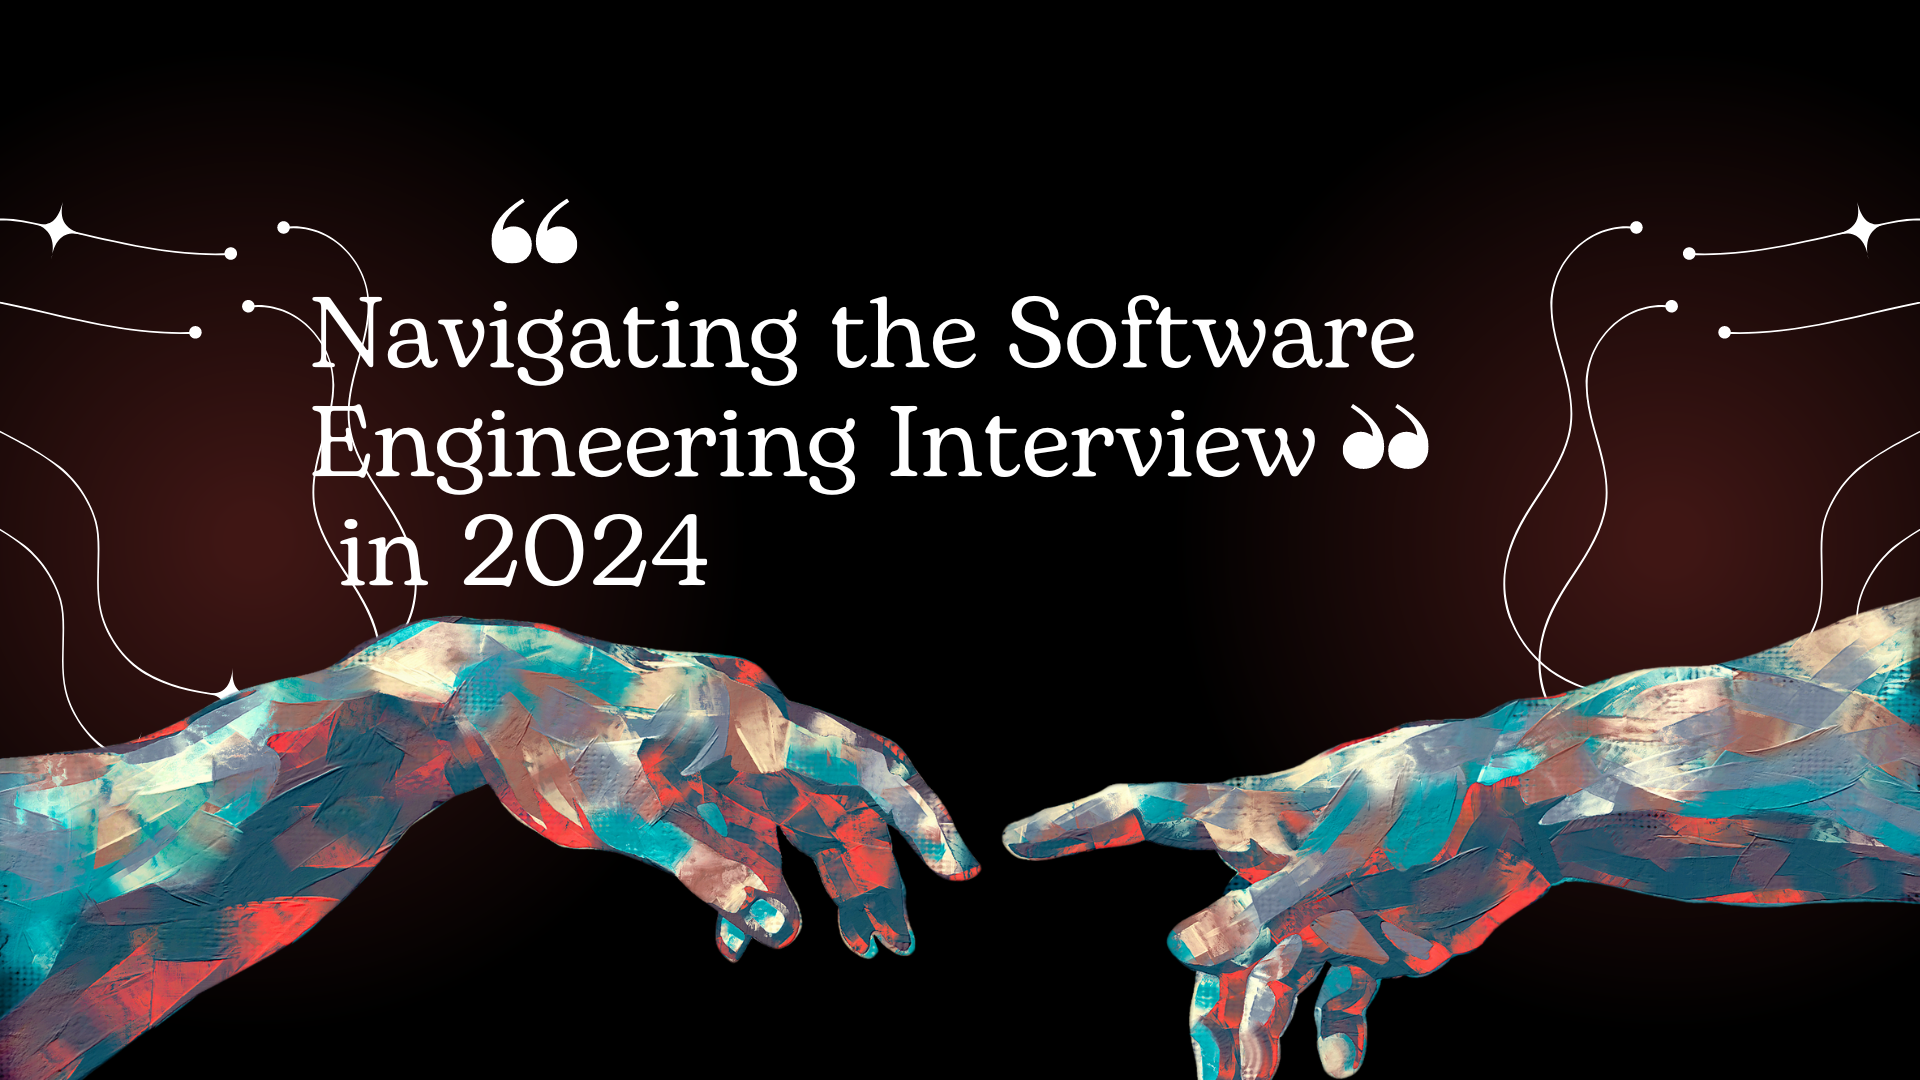 The Technical Interview Landscape in 2024